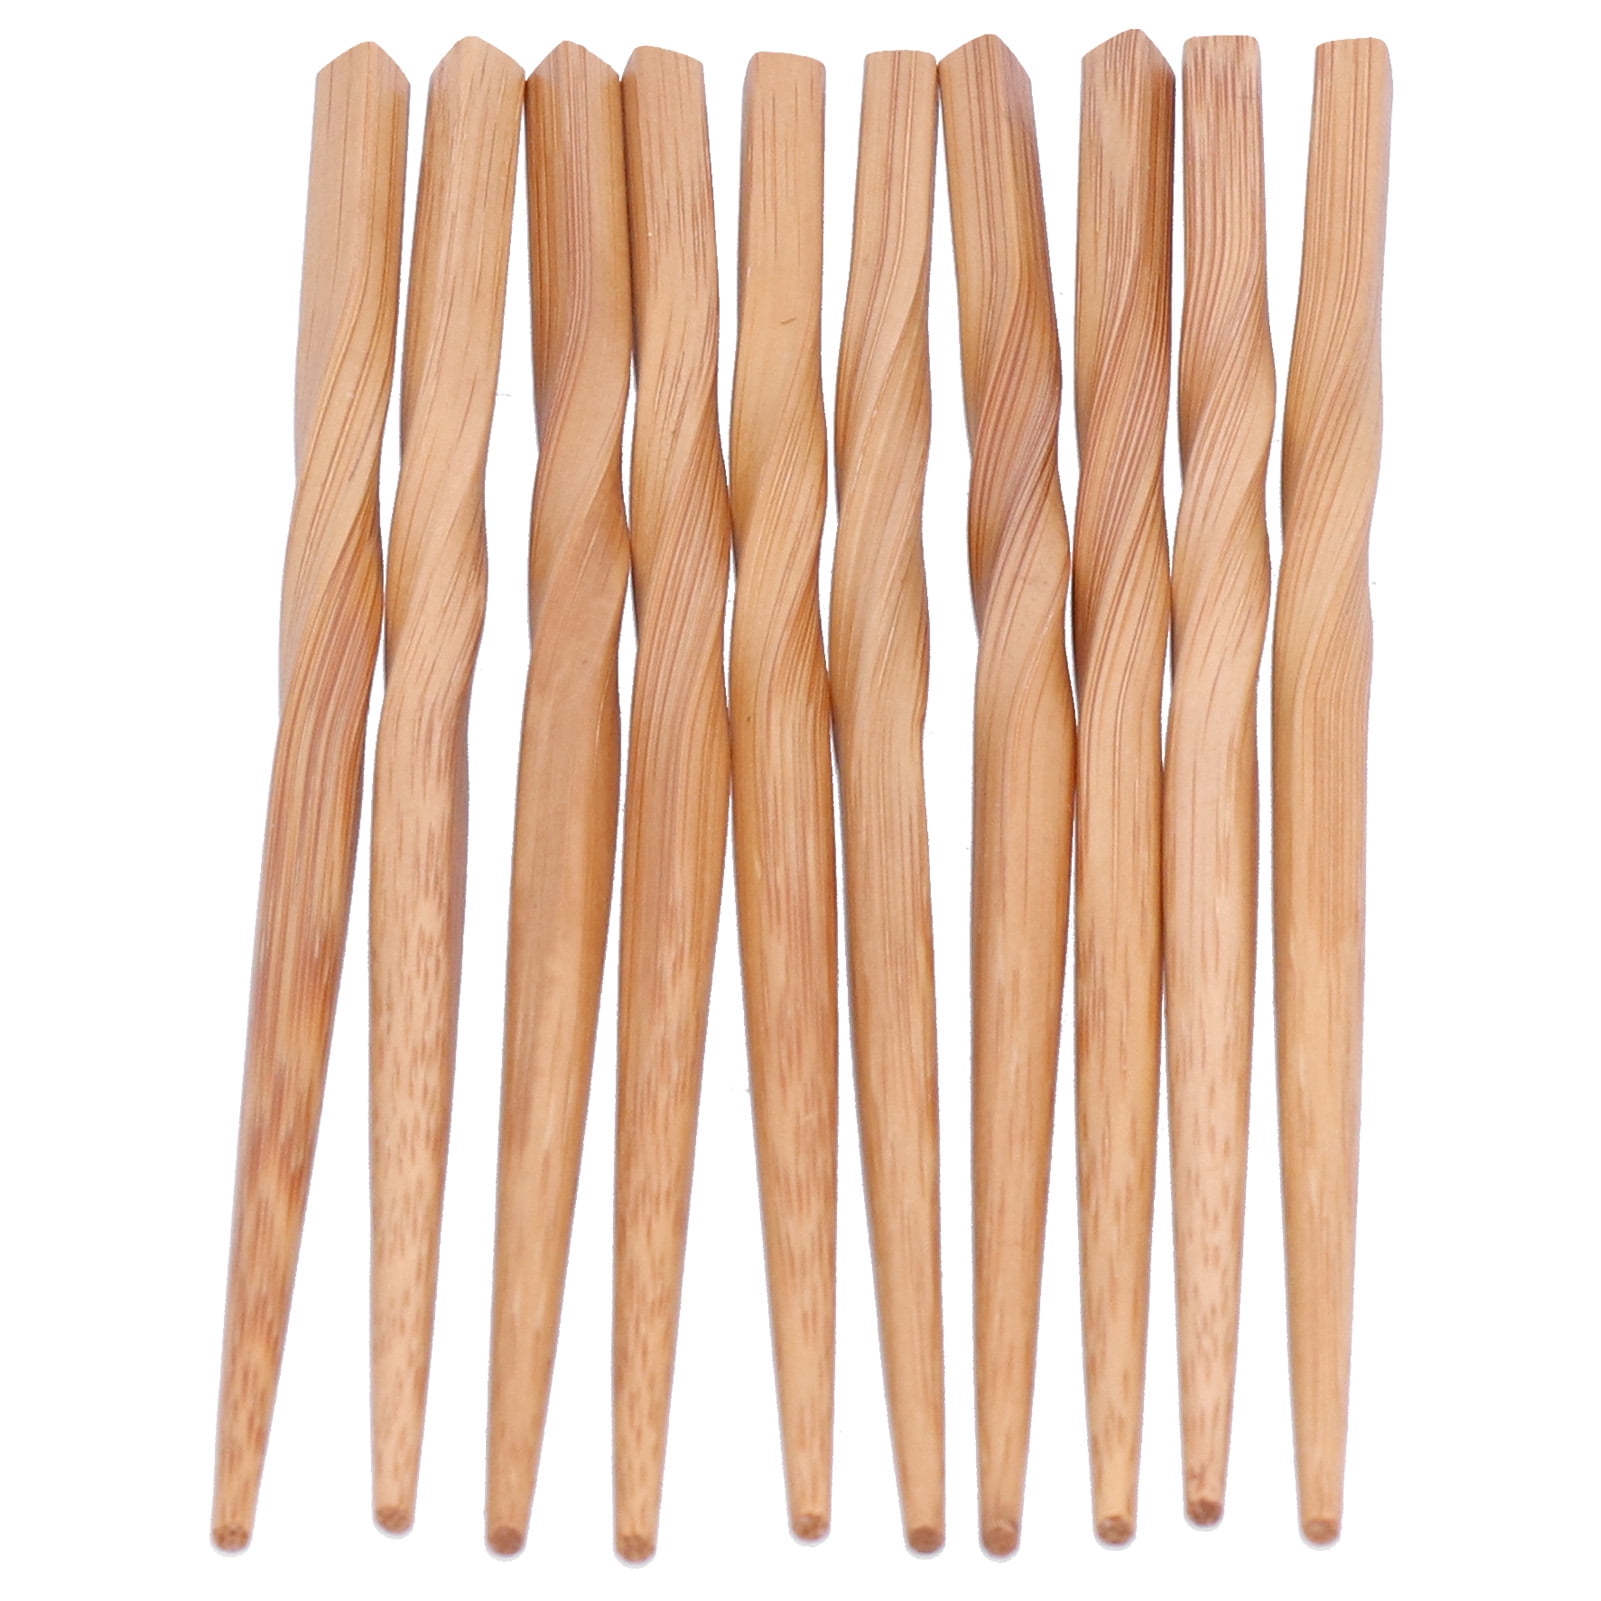 3 3/8" 84mm 48 Quality Birch Hardwood Clothes Pegs - Long Lasting 